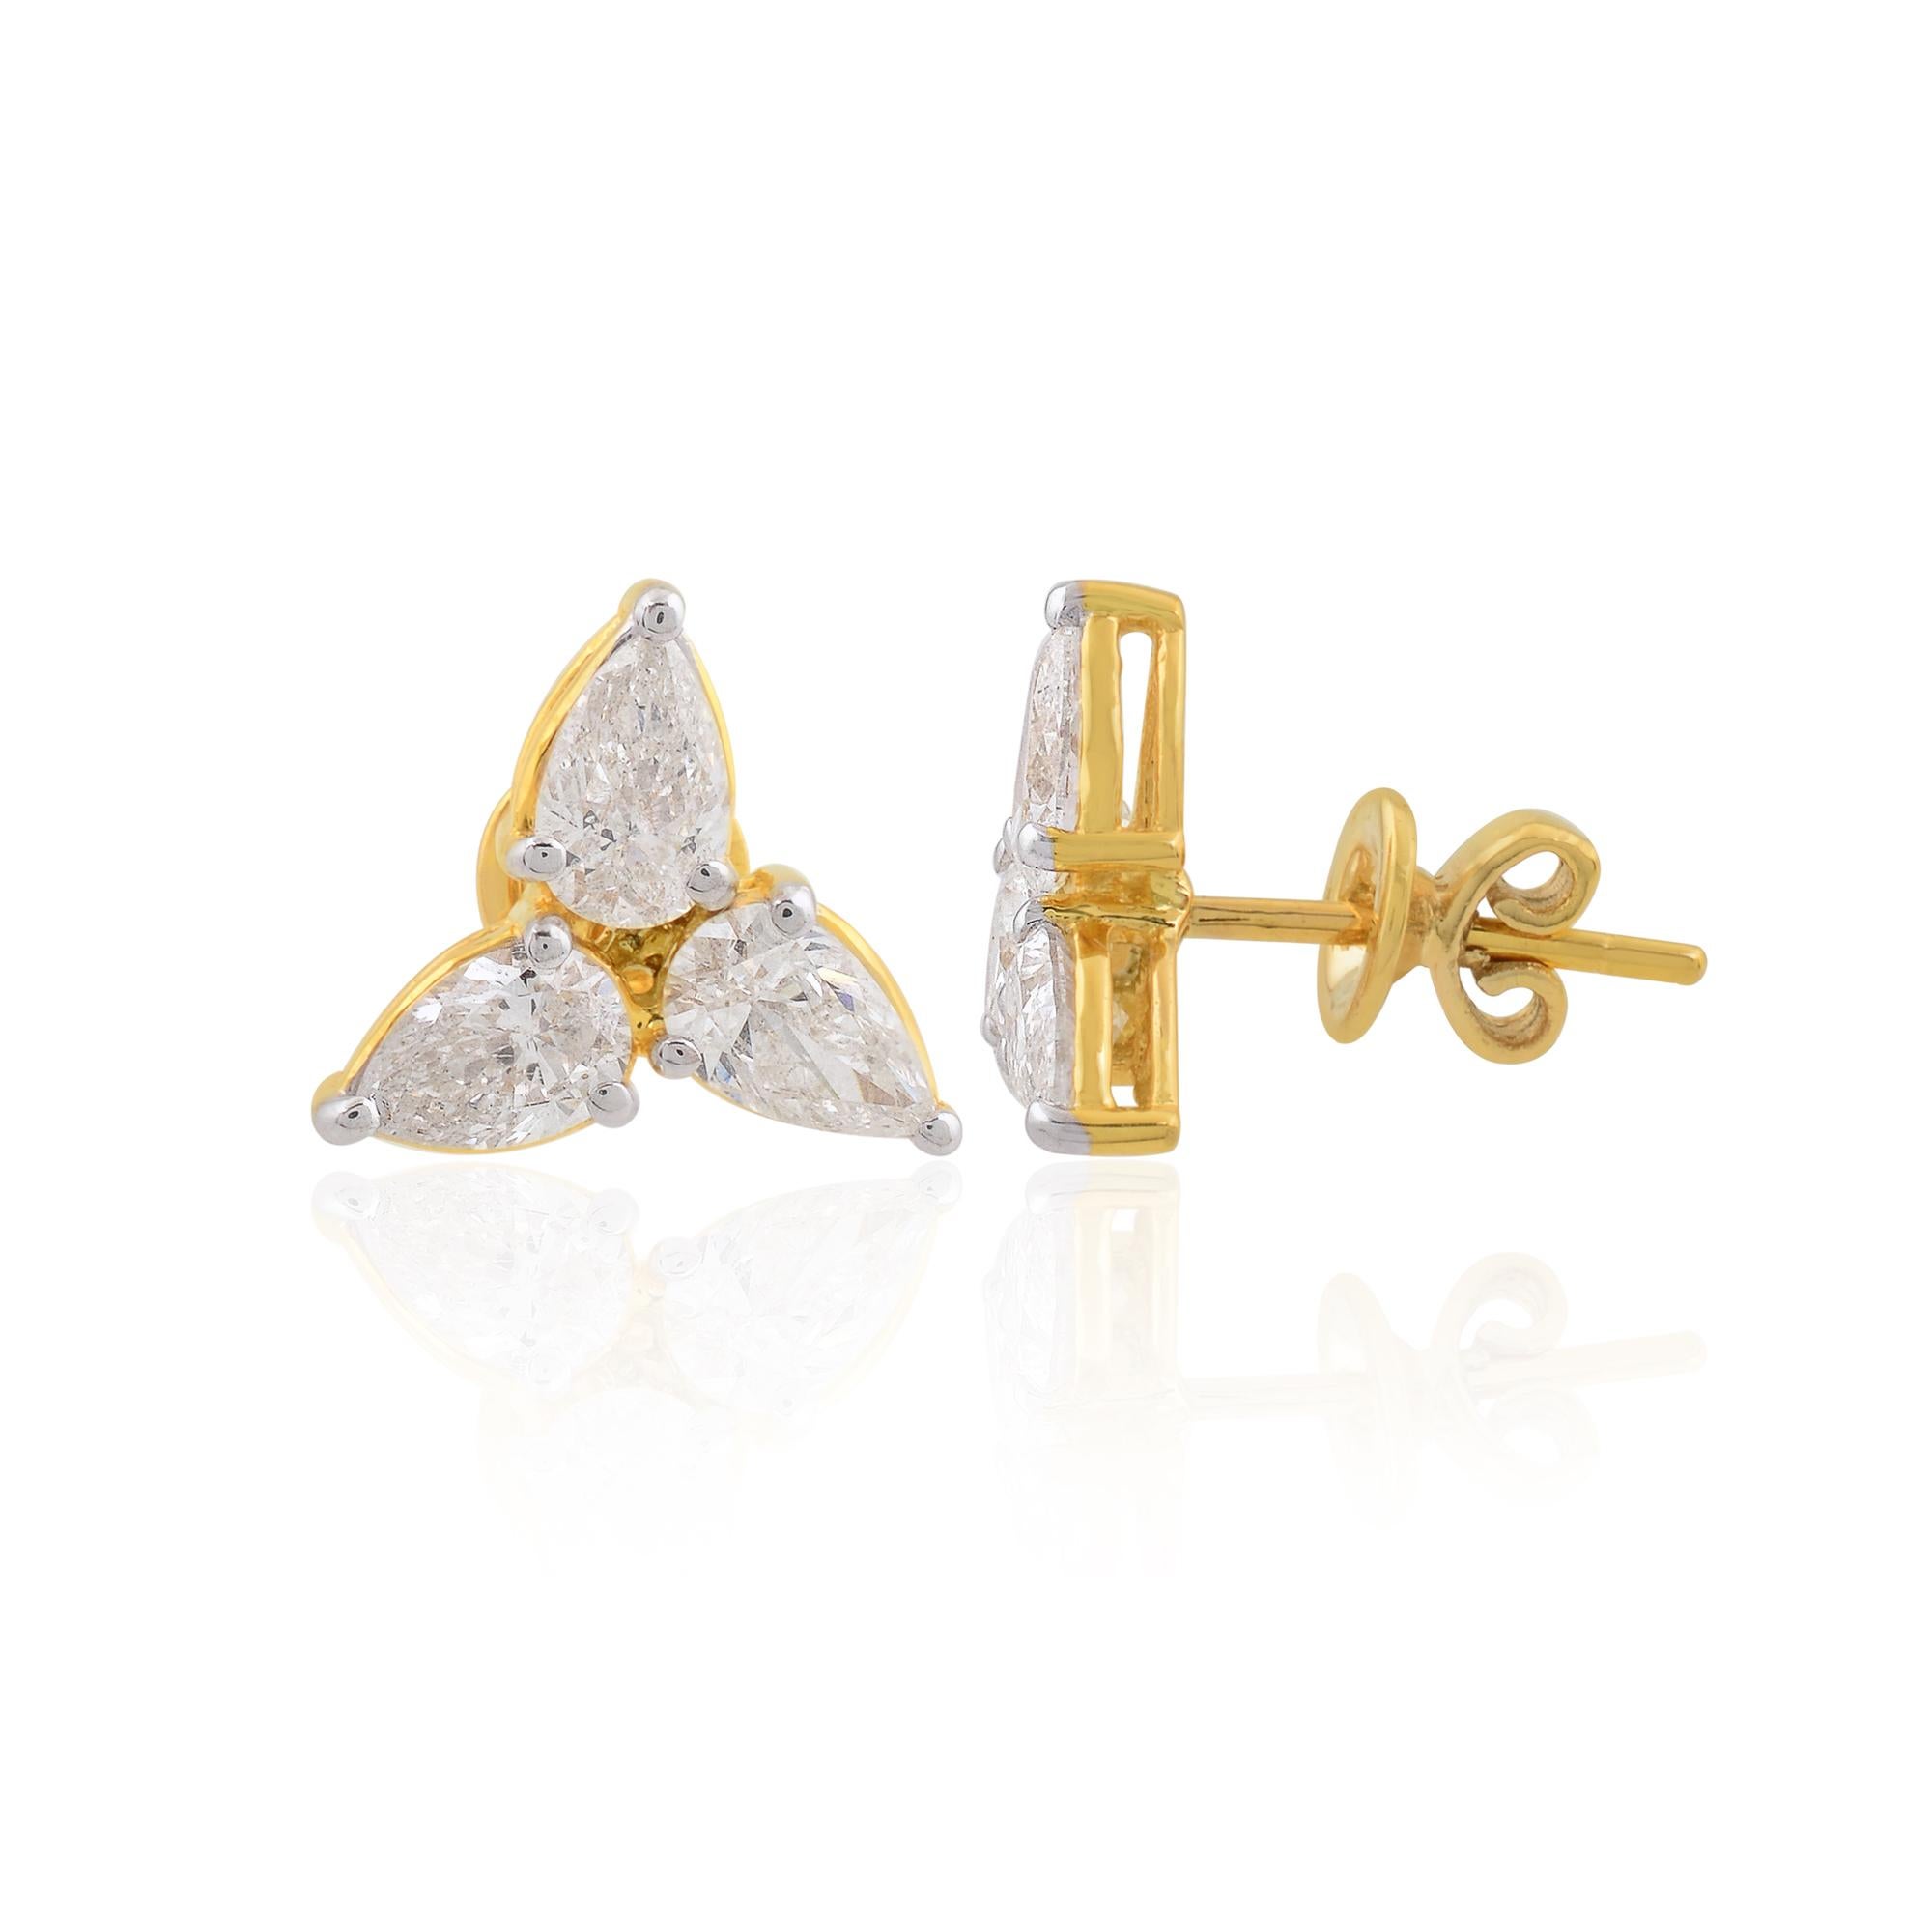 Item Code :- SEE-1628A
Gross Weight :- 2.25 gm
14k Solid Yellow Gold Weight :- 1.91 gm
Natural Diamond Weight :- 1.92 carat  ( AVERAGE DIAMOND CLARITY SI1-SI2 & COLOR H-I )
Earrings Length :- 12 mm approx.

✦ Sizing
.....................
We can